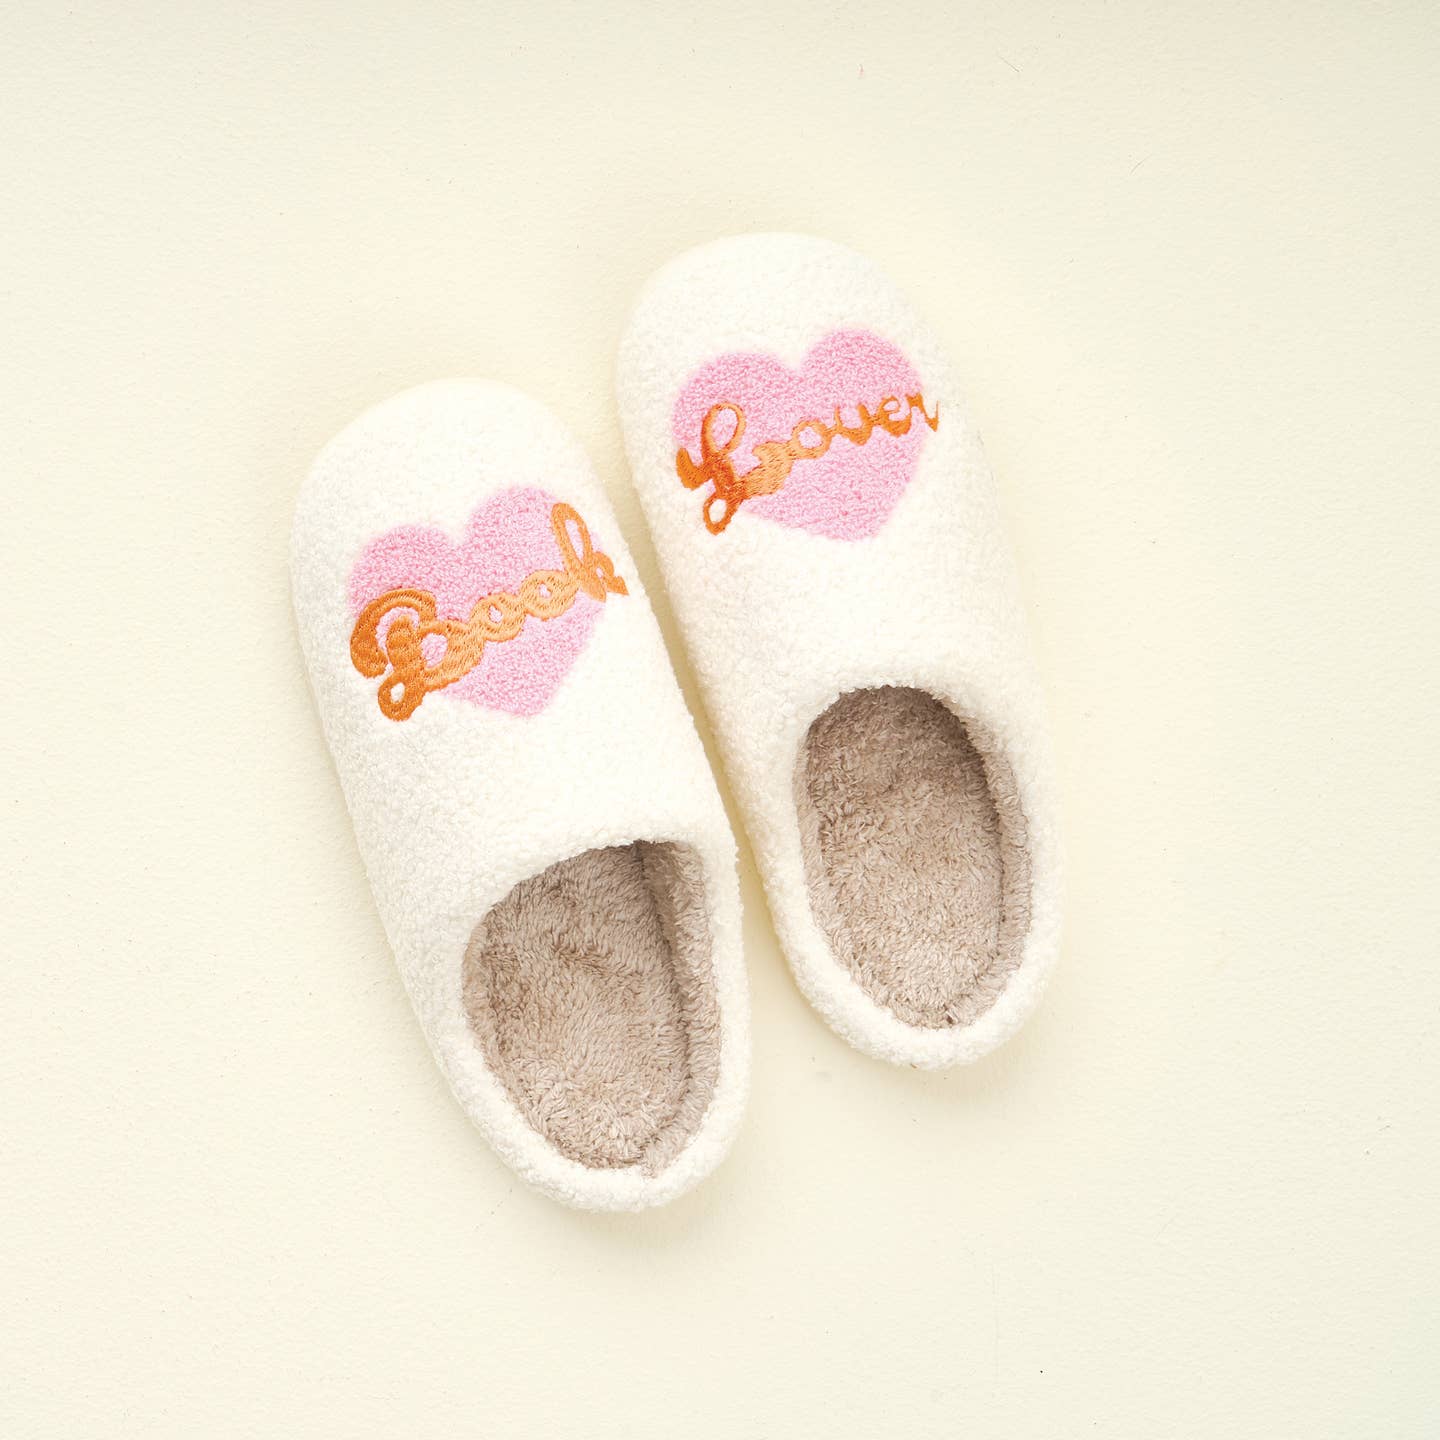 Book Lover Slippers